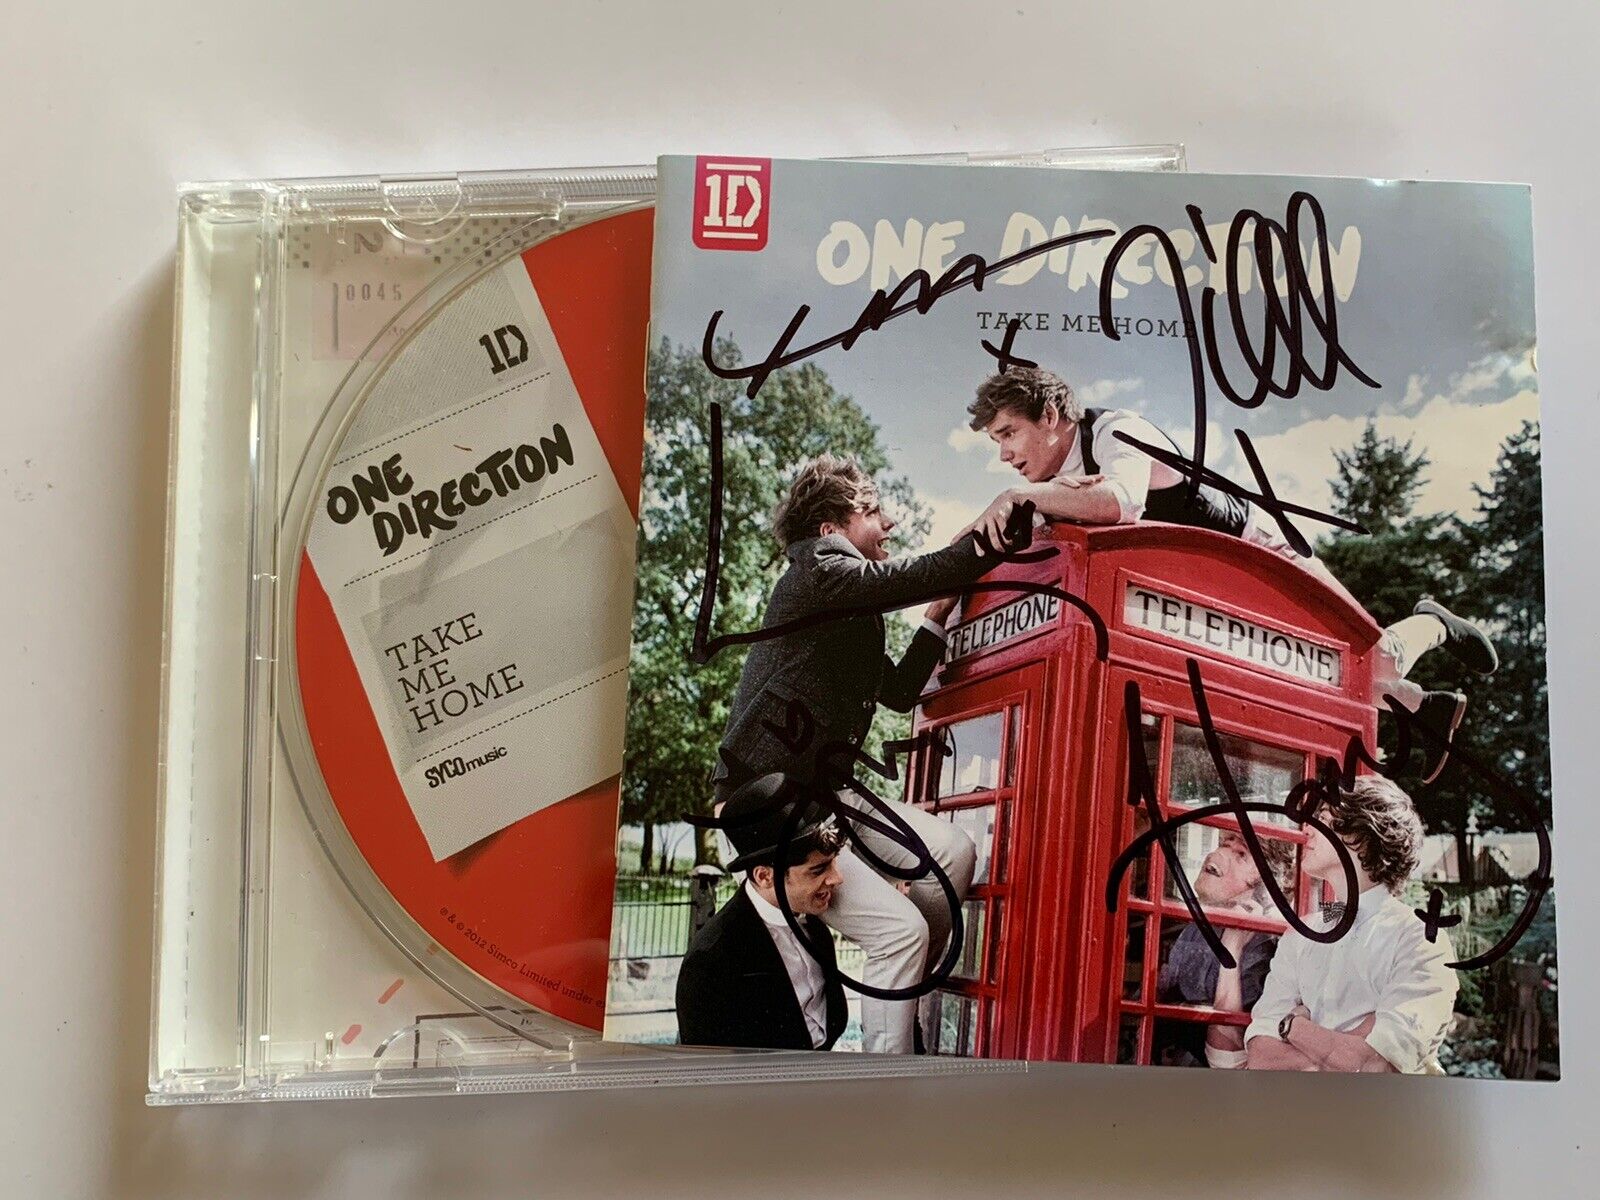 One Direction Take Me Home ( Signed Autographed ) Original 2012 CD Album All 5